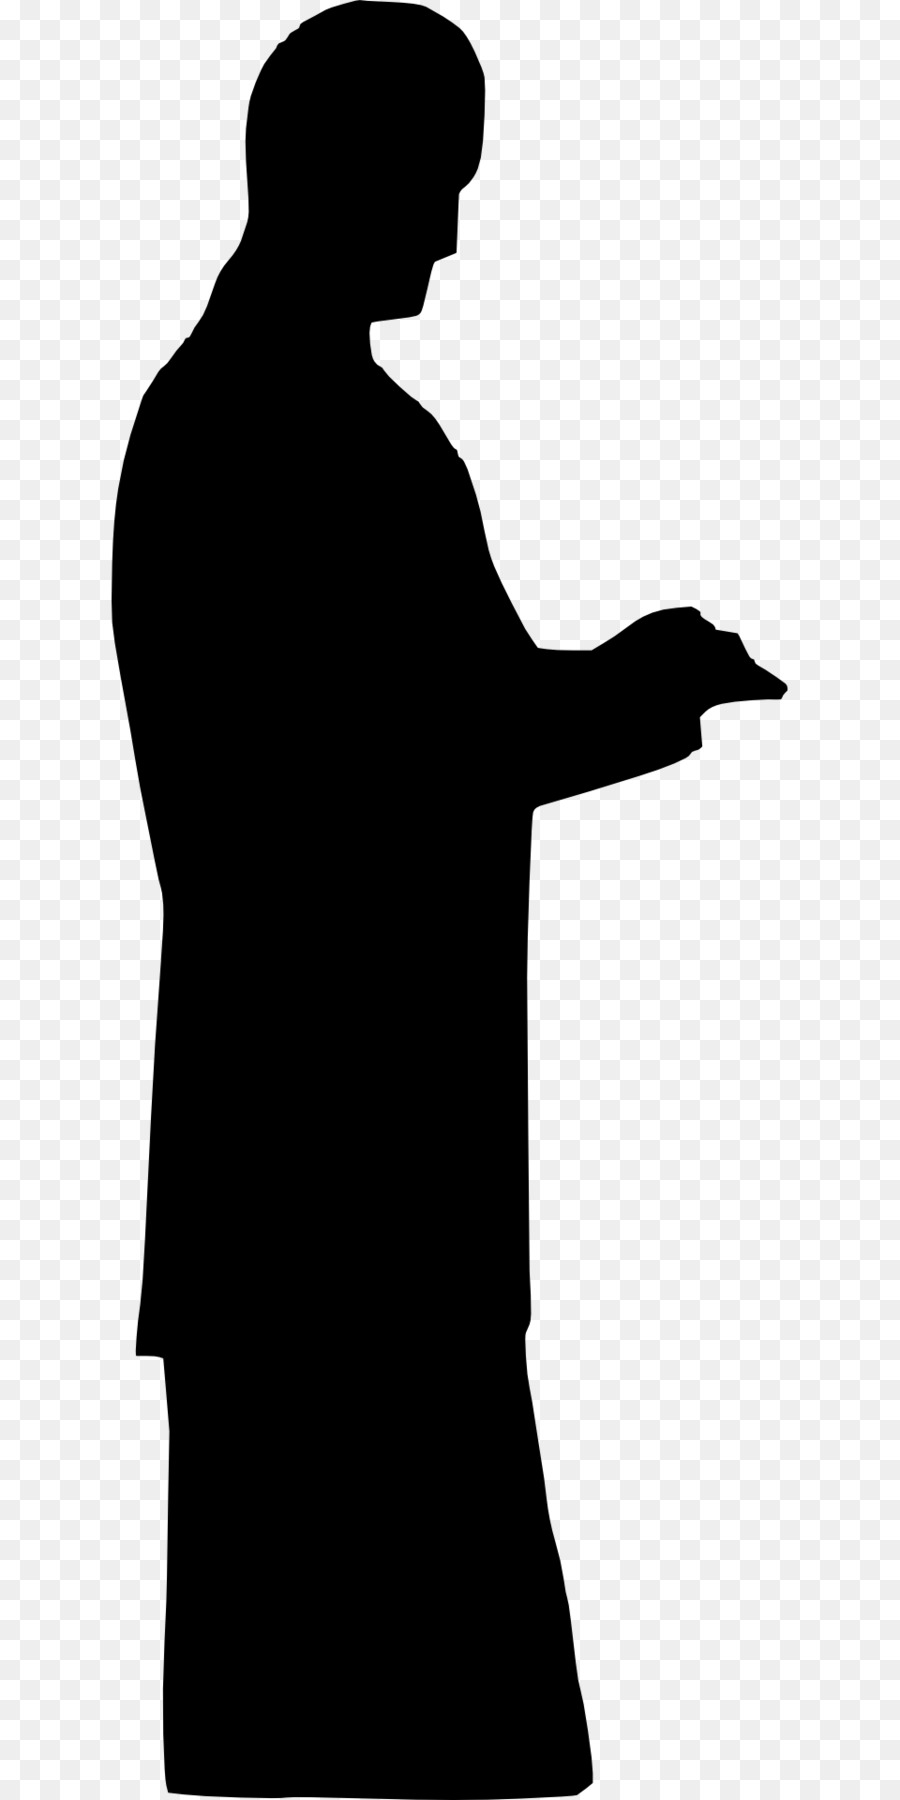 Businessperson Man Clip art - man silhouette png download - 960*1920 - Free Transparent Businessperson png Download.